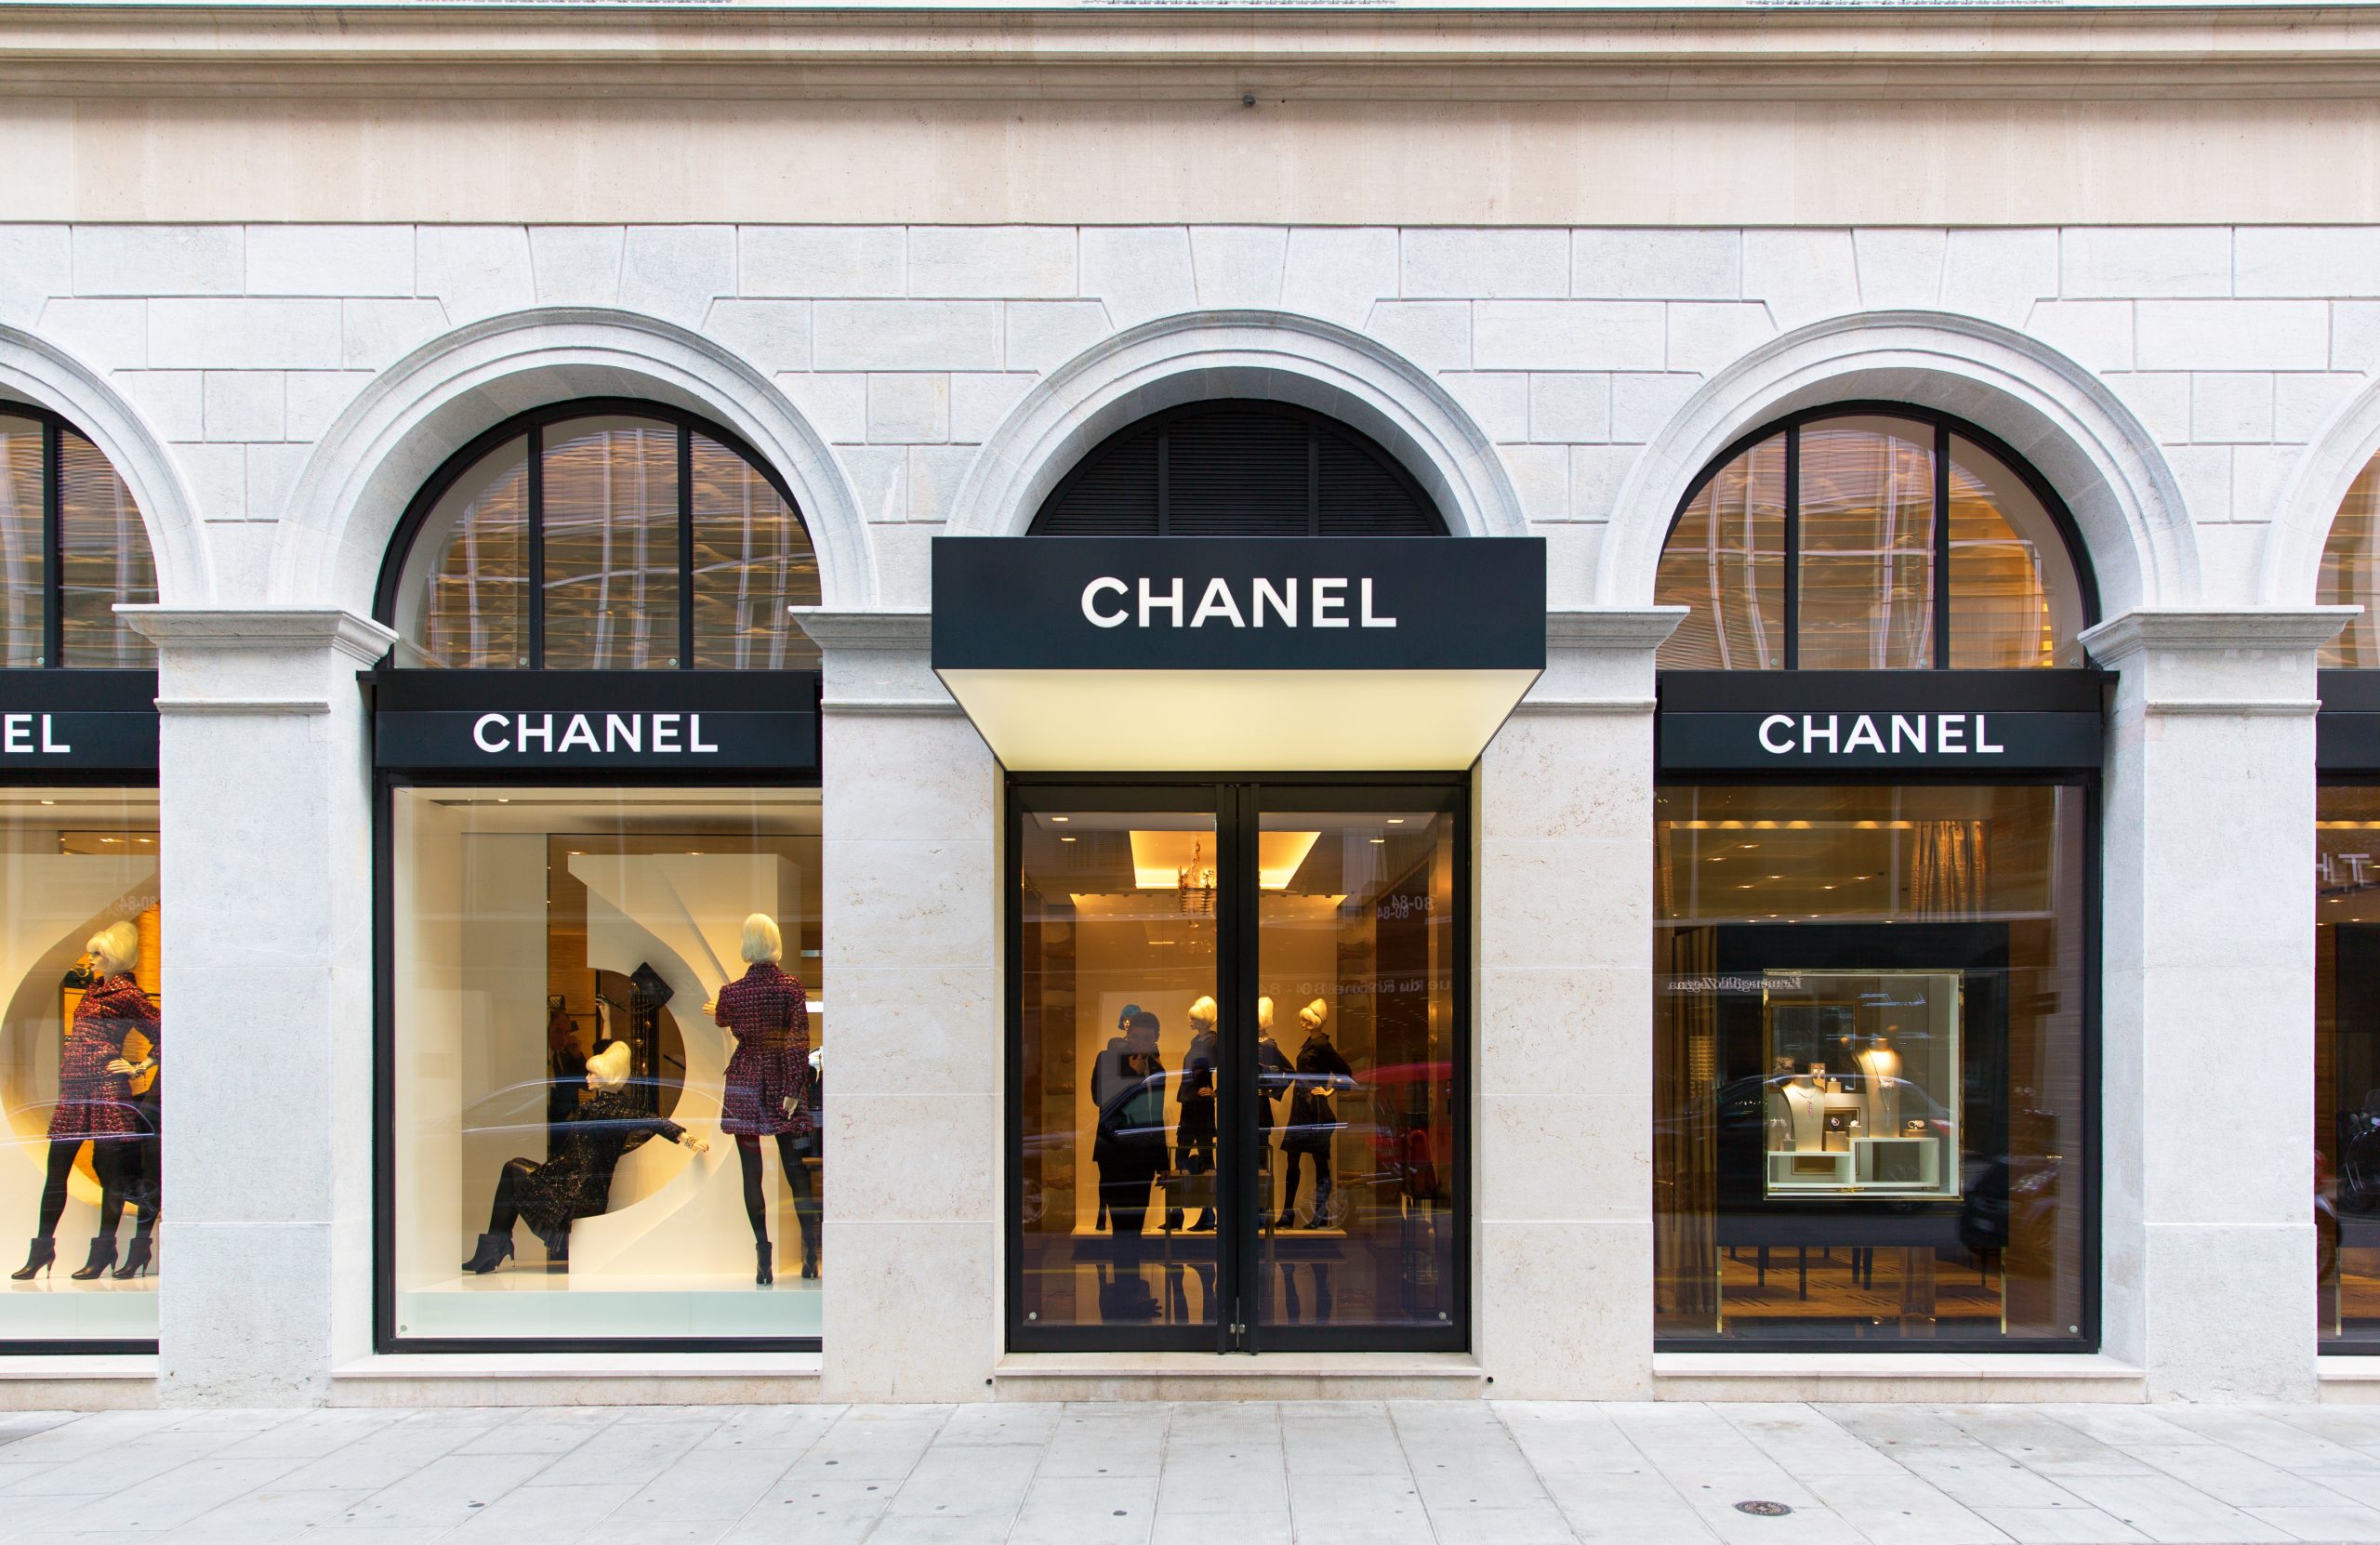 Chanel Names Unilever Exec as CEO – Visual Merchandising and Store